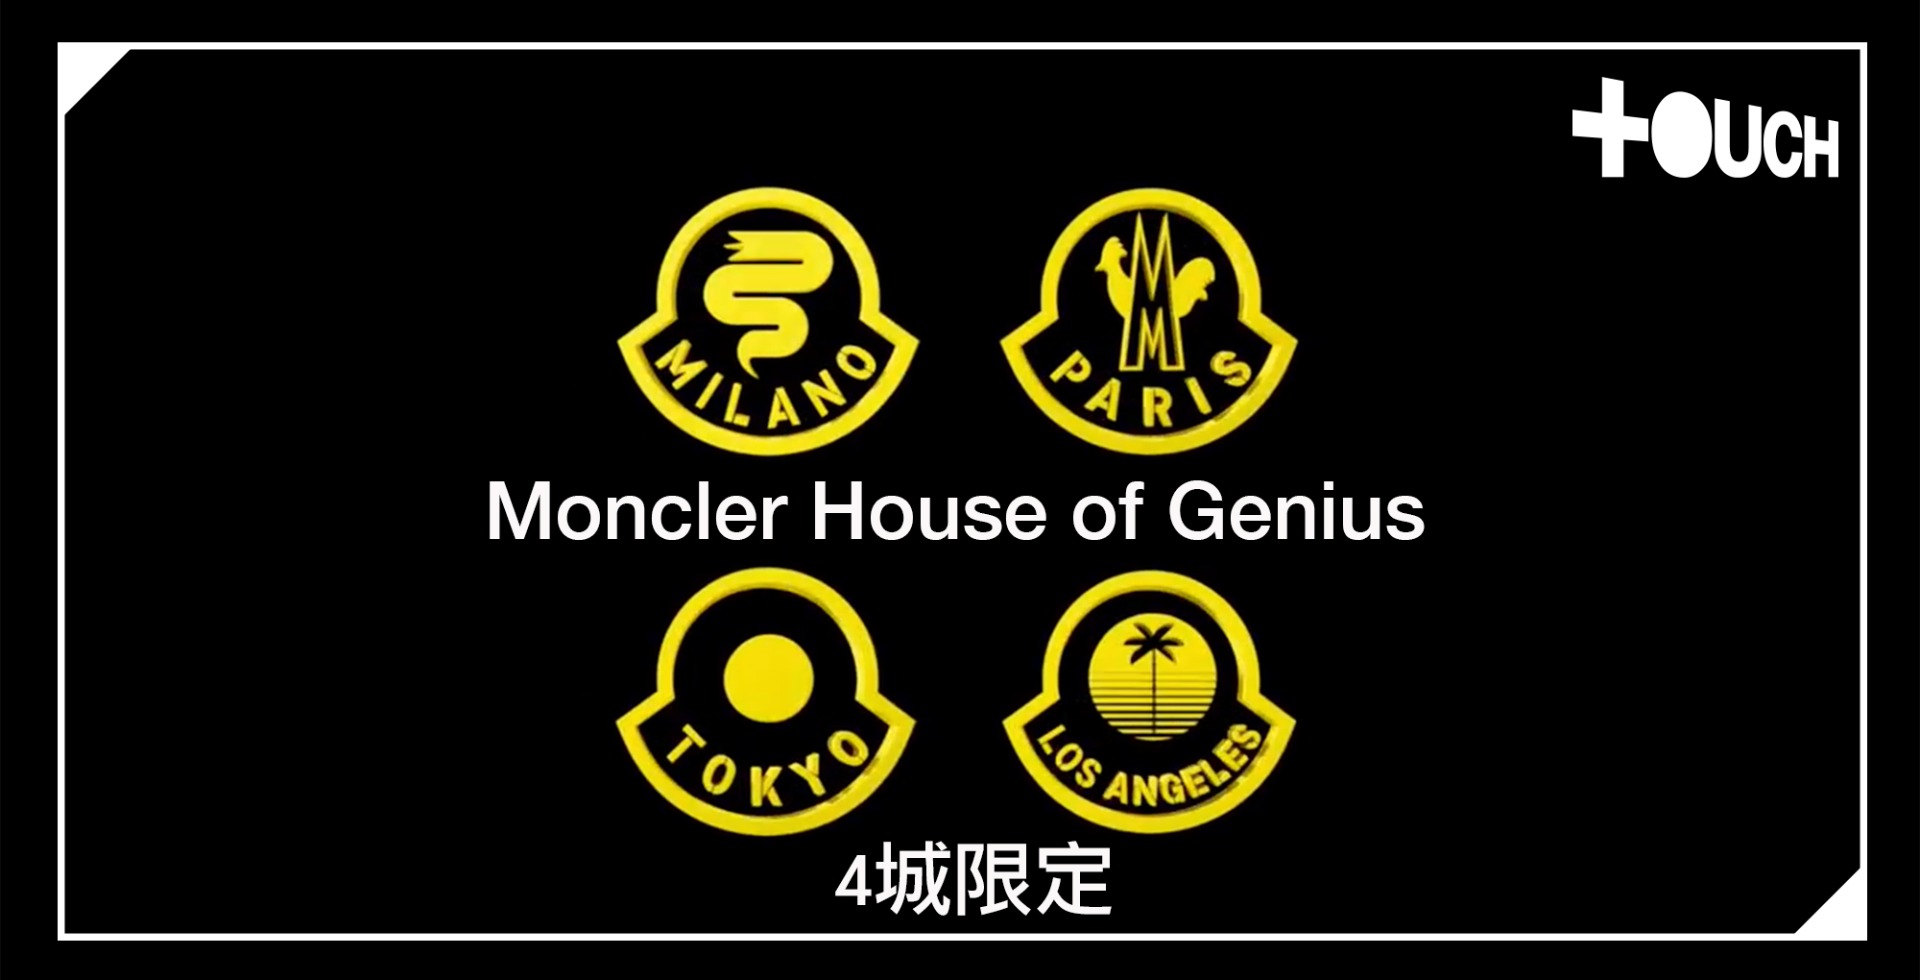 EAST TOUCH - FASHION - Moncler House of Genius．4城限定